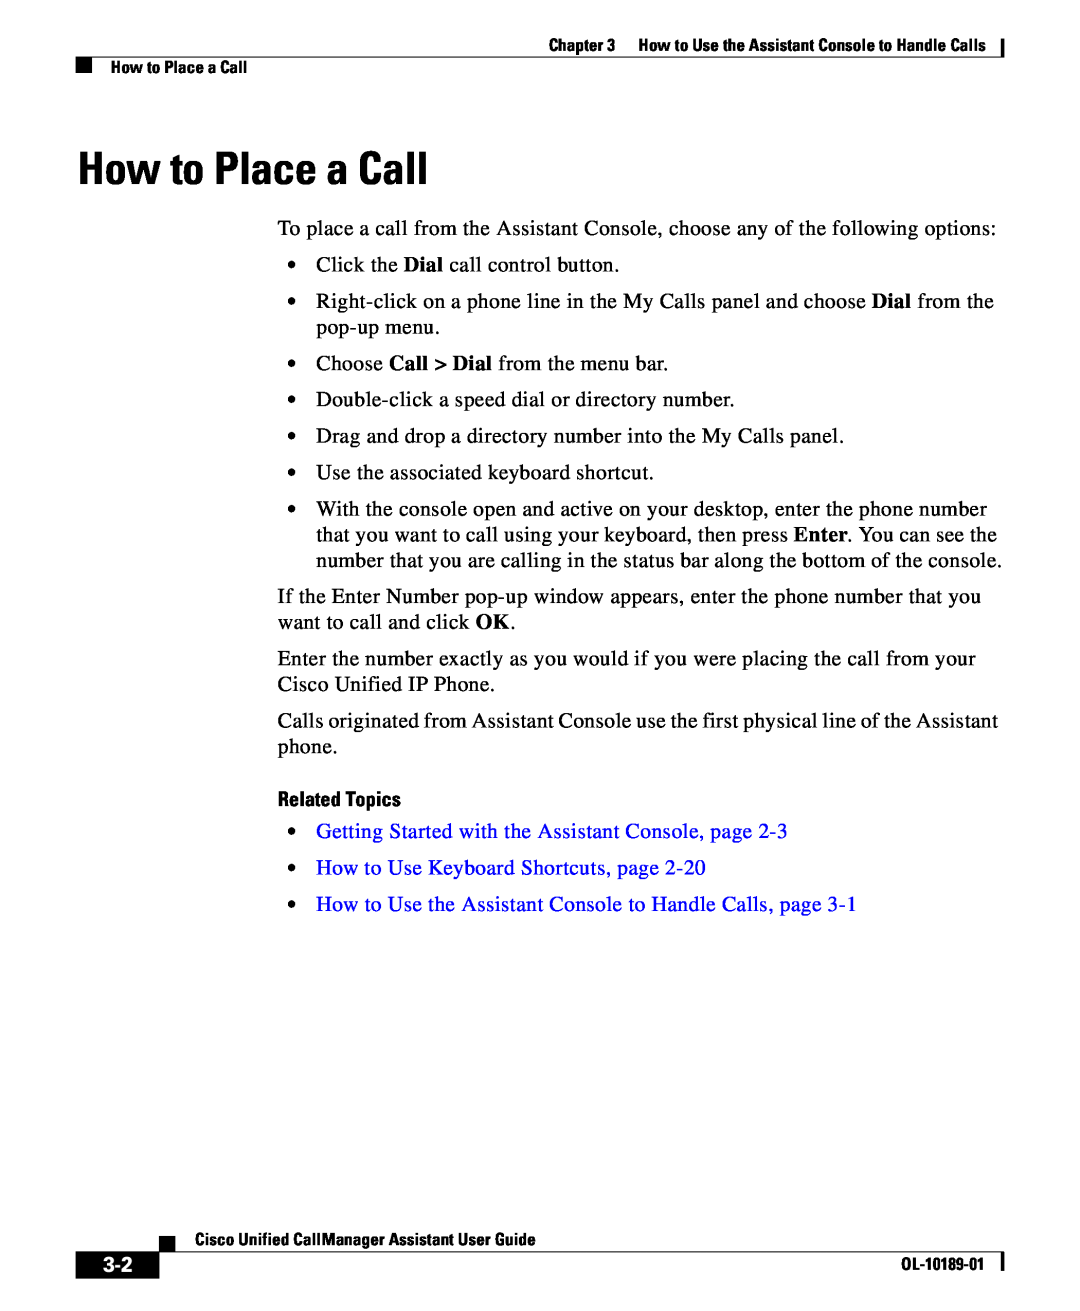 Cisco Systems OL-10189-01 manual How to Place a Call, Related Topics, Getting Started with the Assistant Console, page 